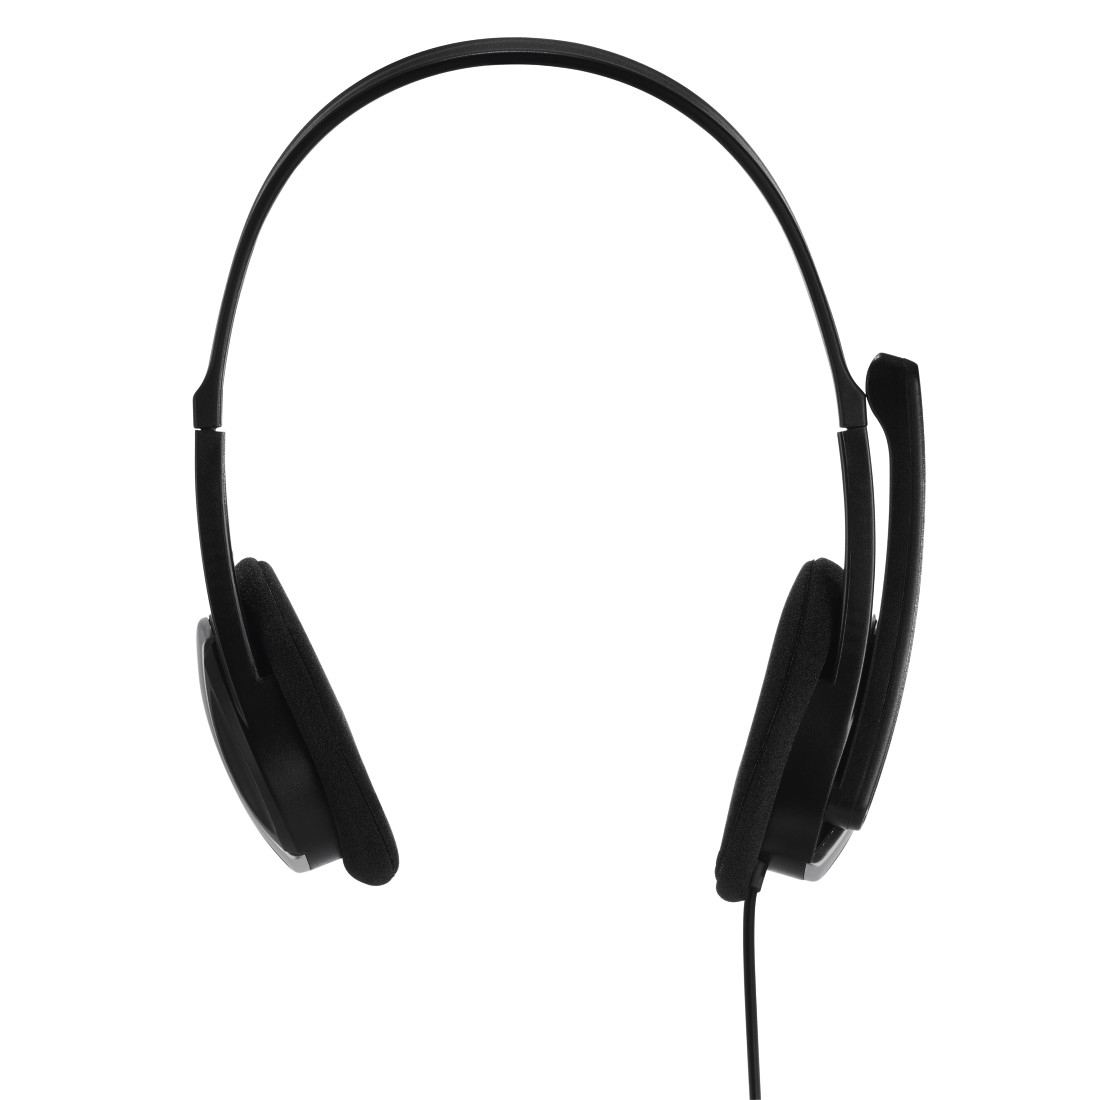 HAMA PC Office Headset 3.5mm - - HS-P100 Stereo 139900 - Black/Silver 